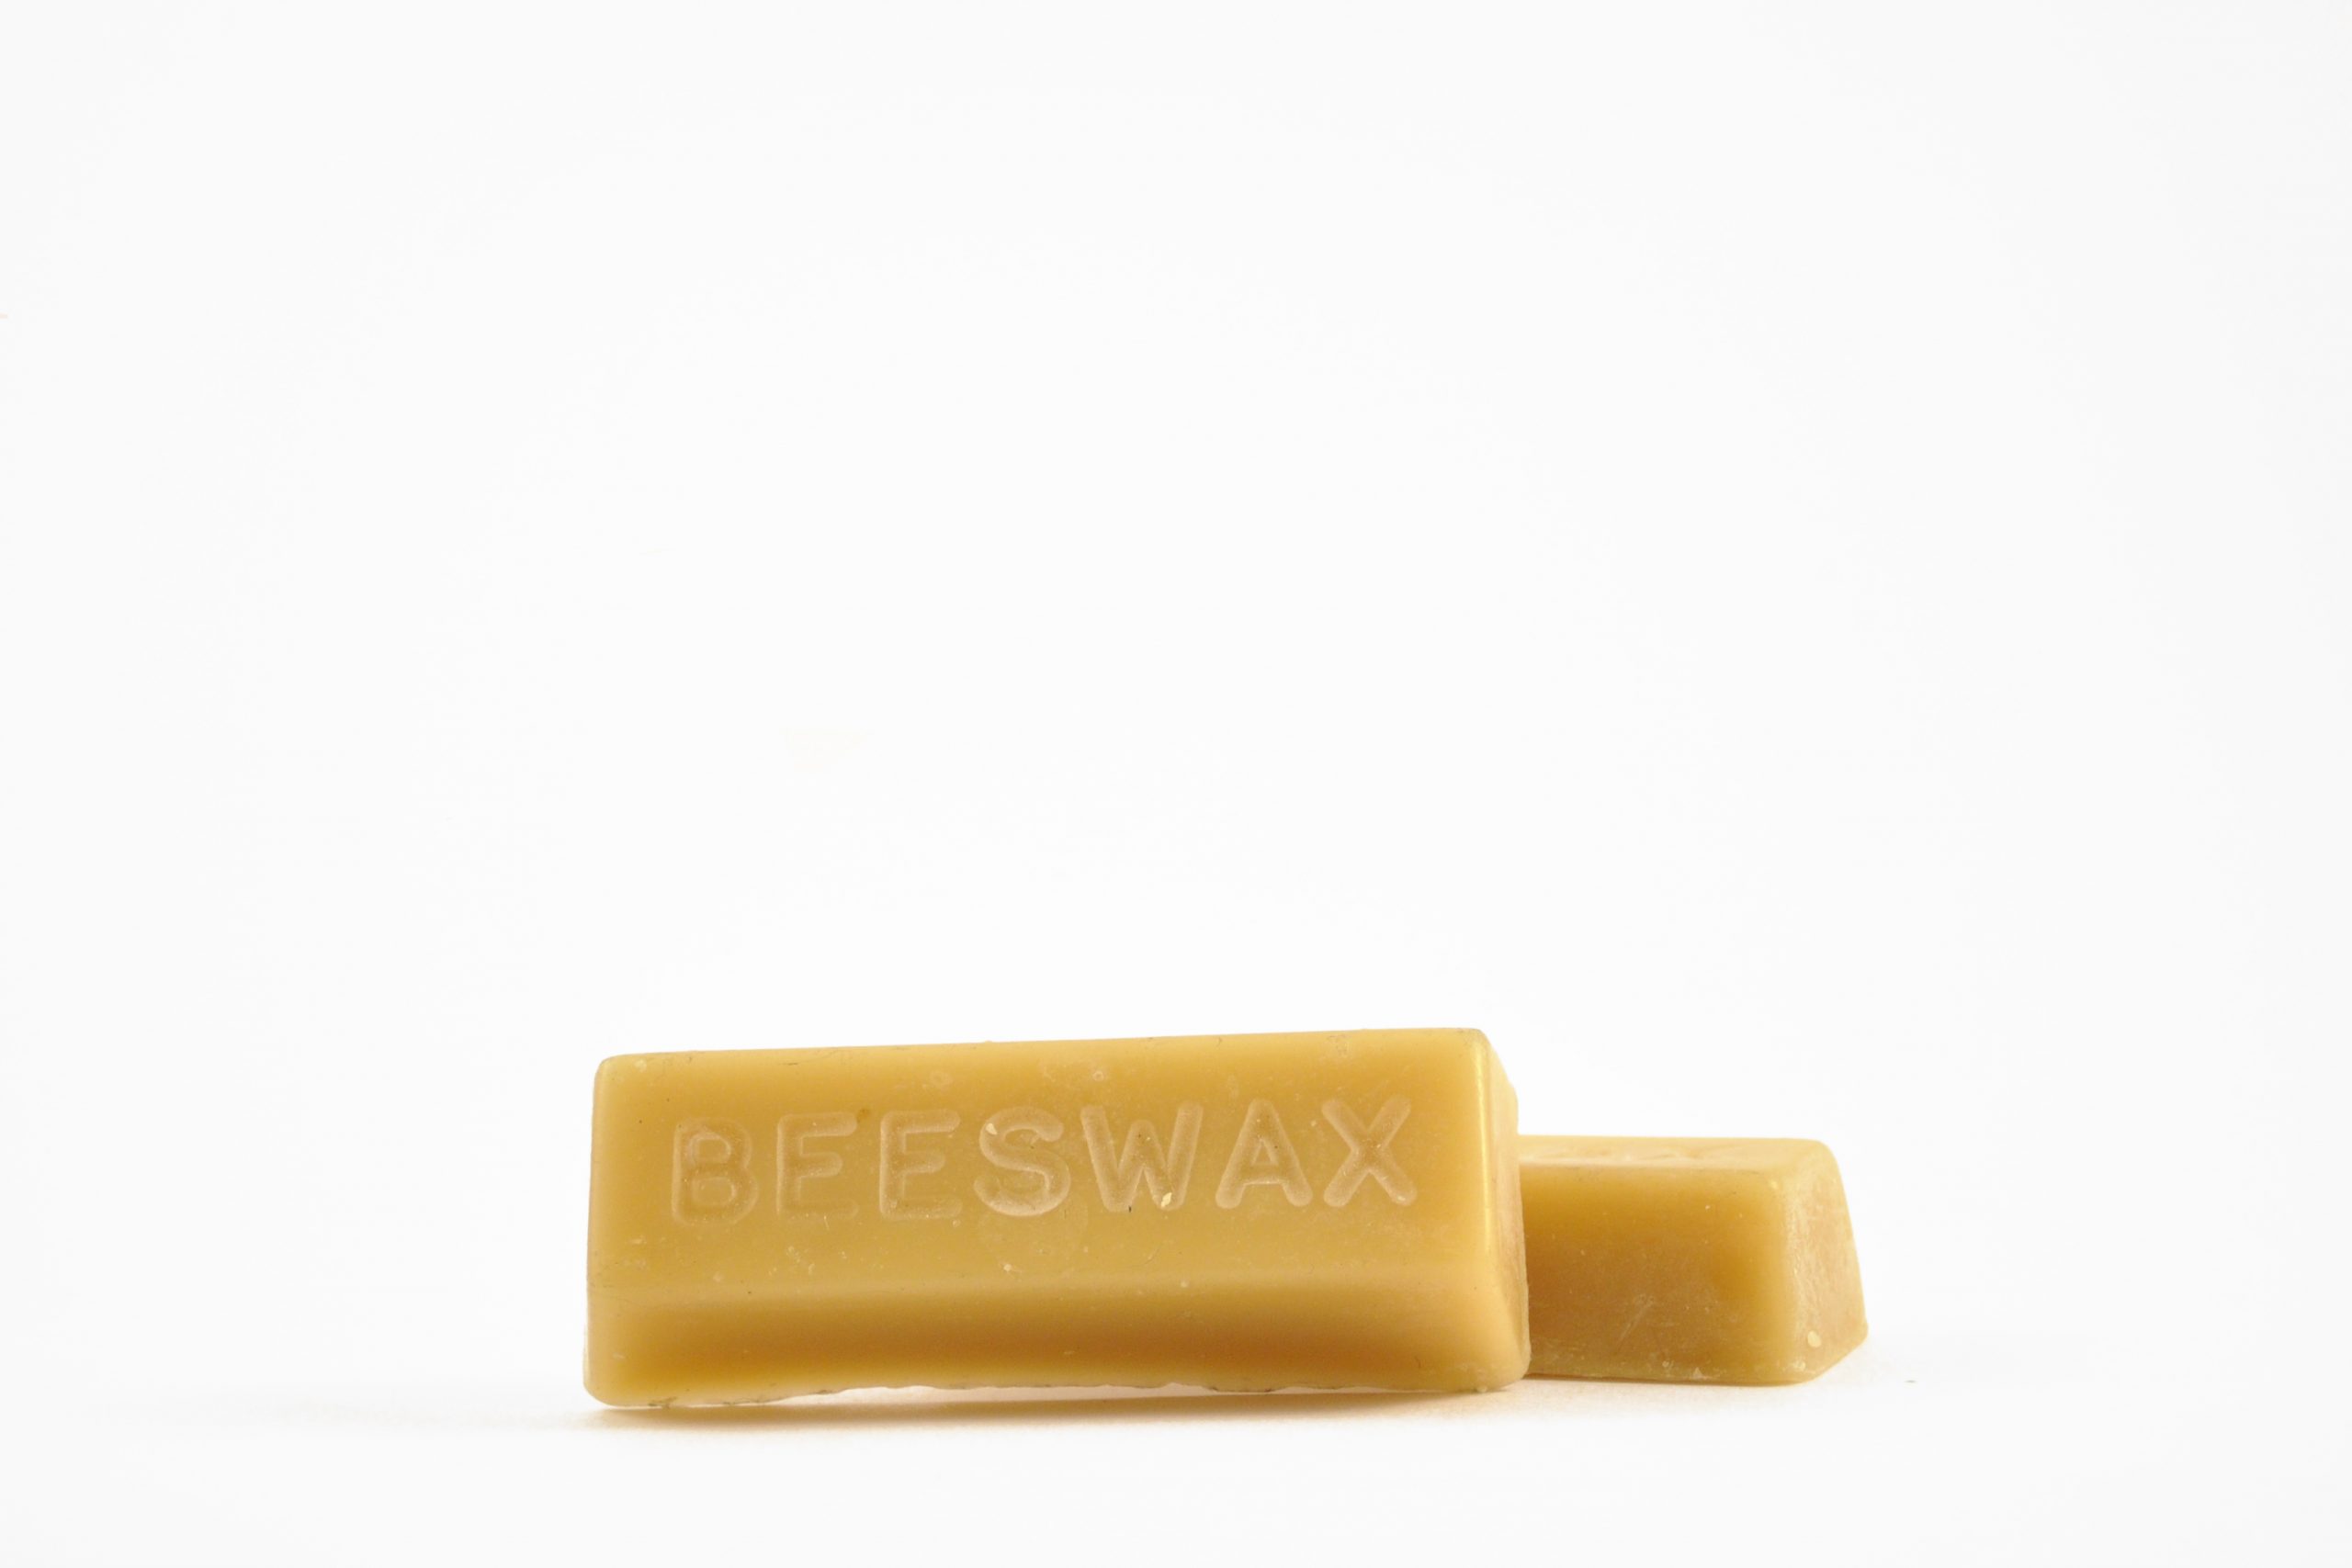 Lineco 1 oz Genuine Beeswax Block. Perfect for Framers, Conservators and  Book Binders for Waxing Thread.